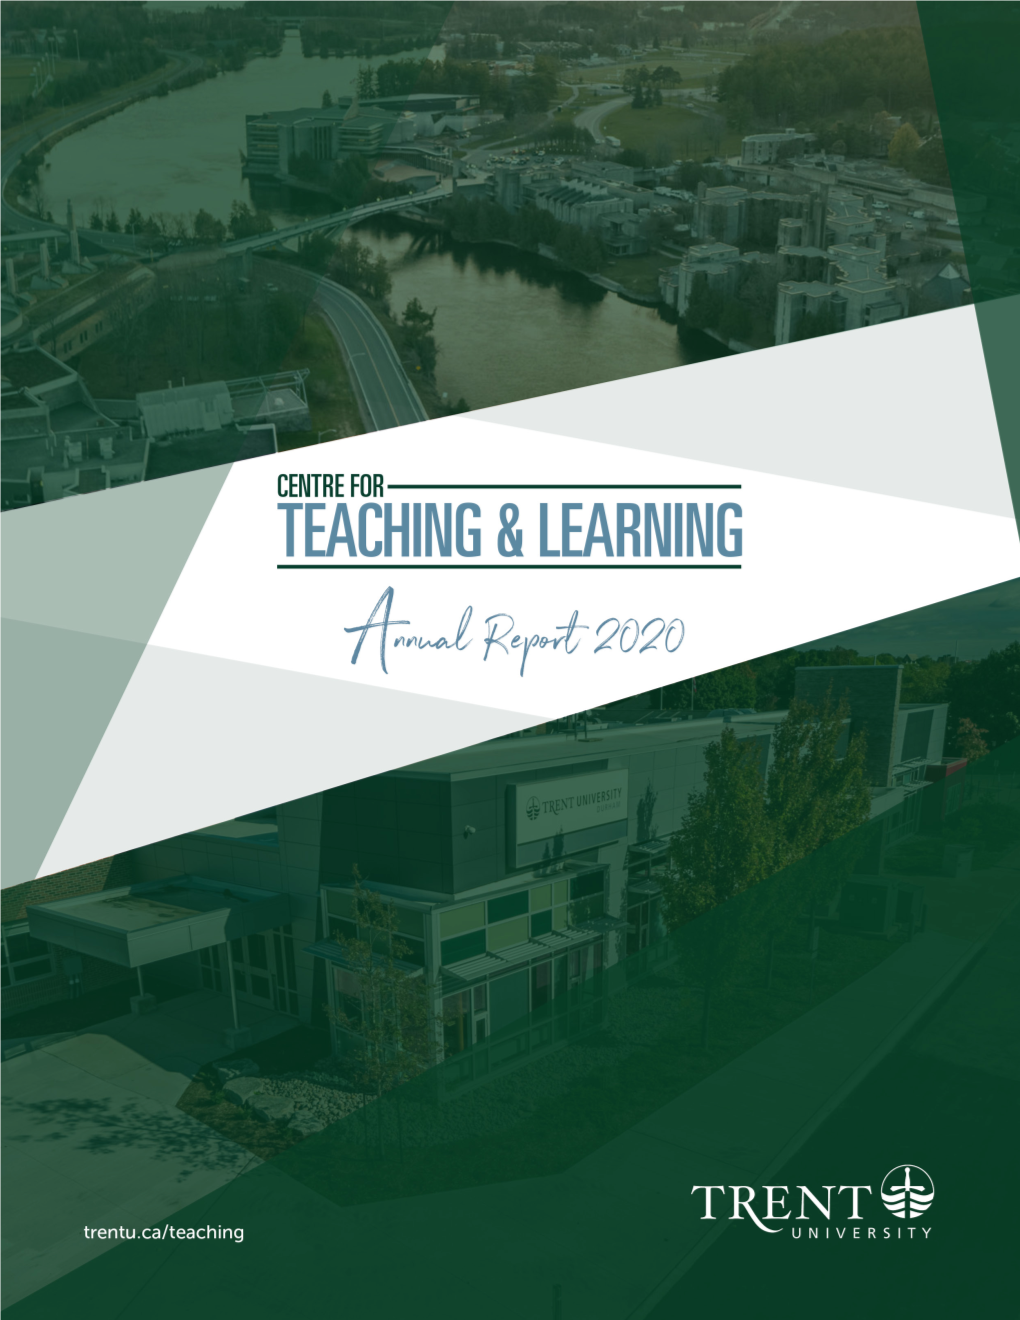 Download the 2020 Annual Report